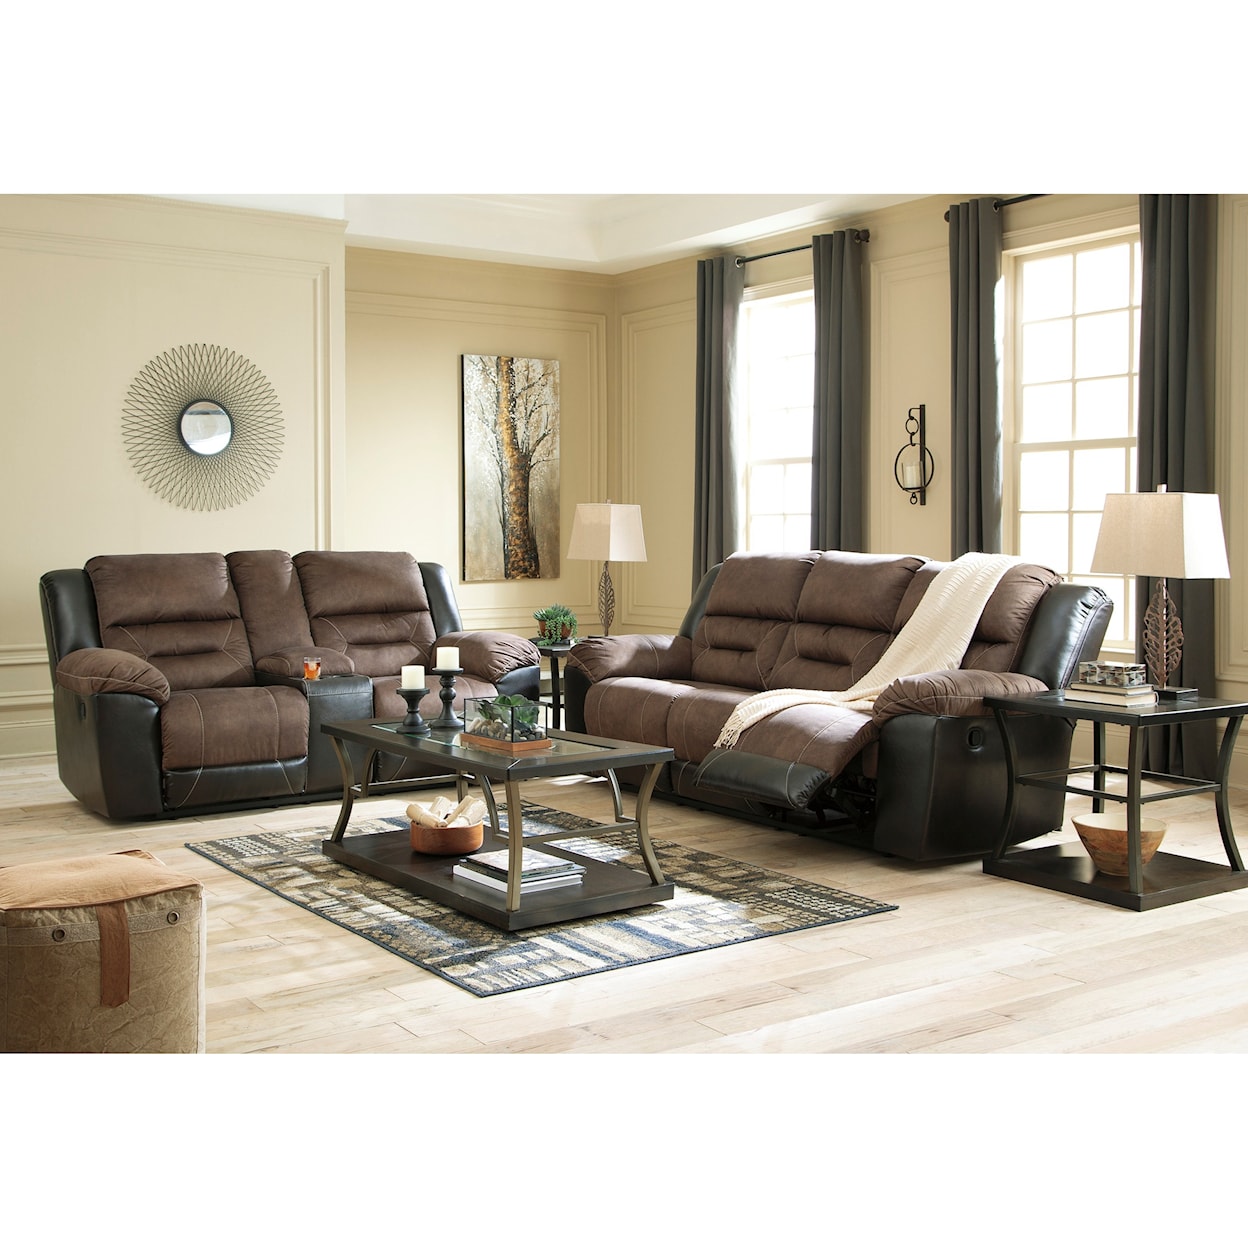 StyleLine DALLAS Reclining Living Room Group